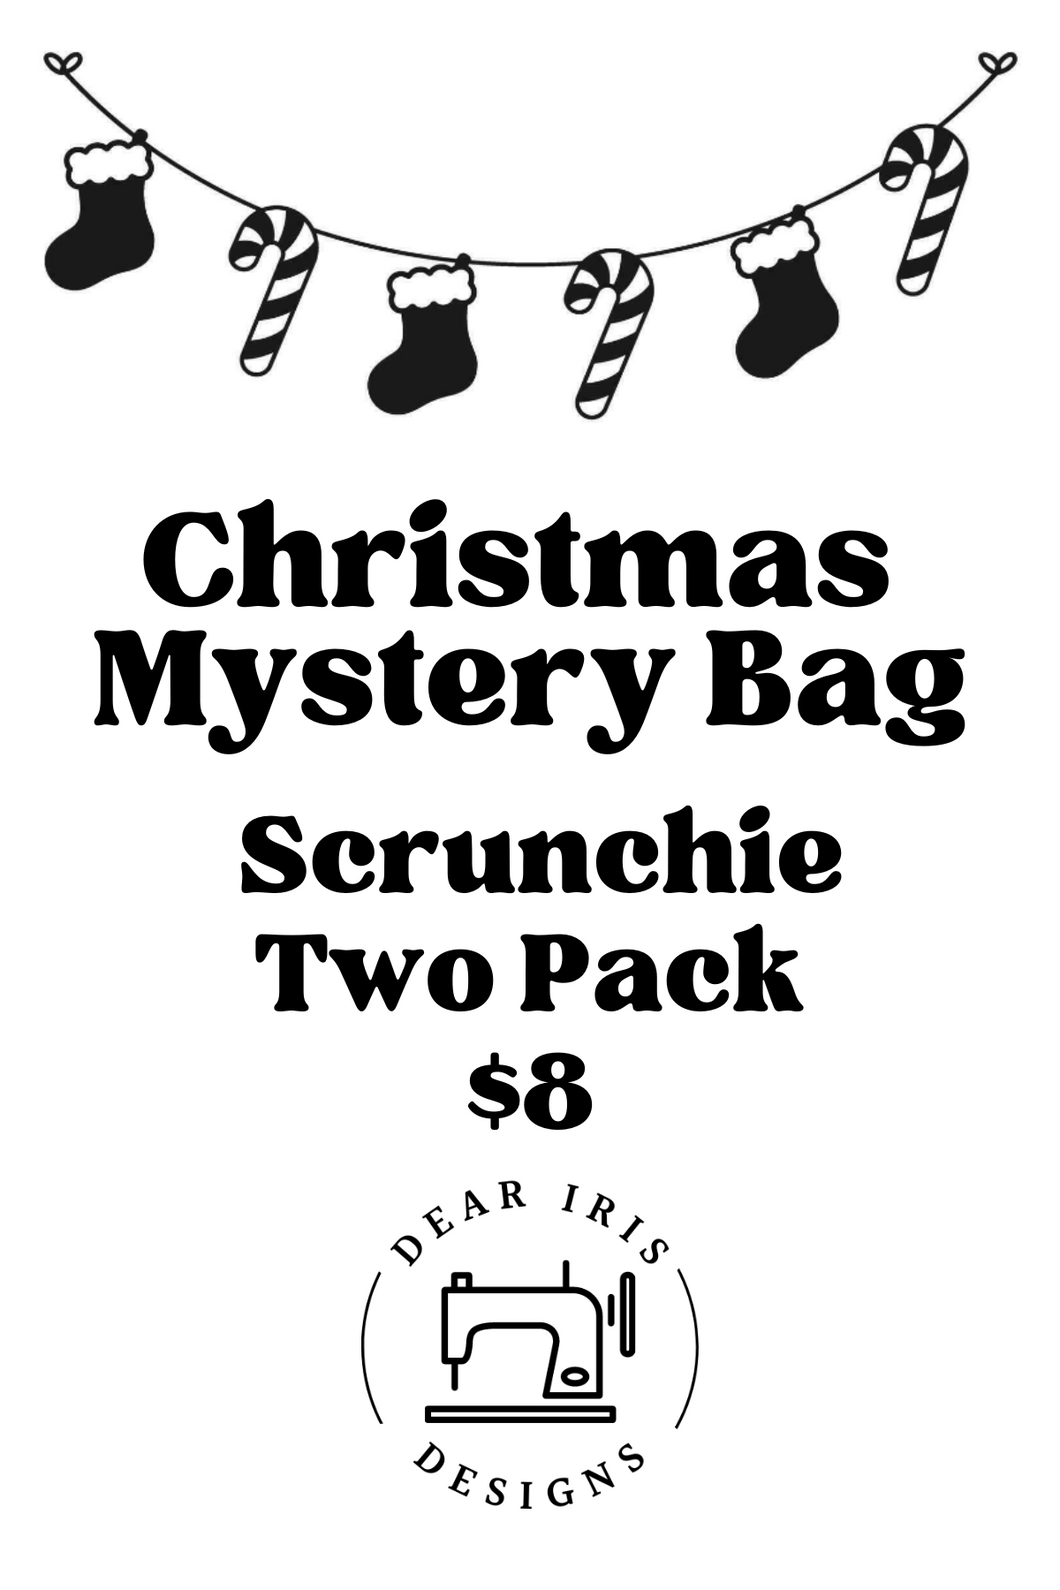 Scrunchie Two Pack Christmas Mystery Bag